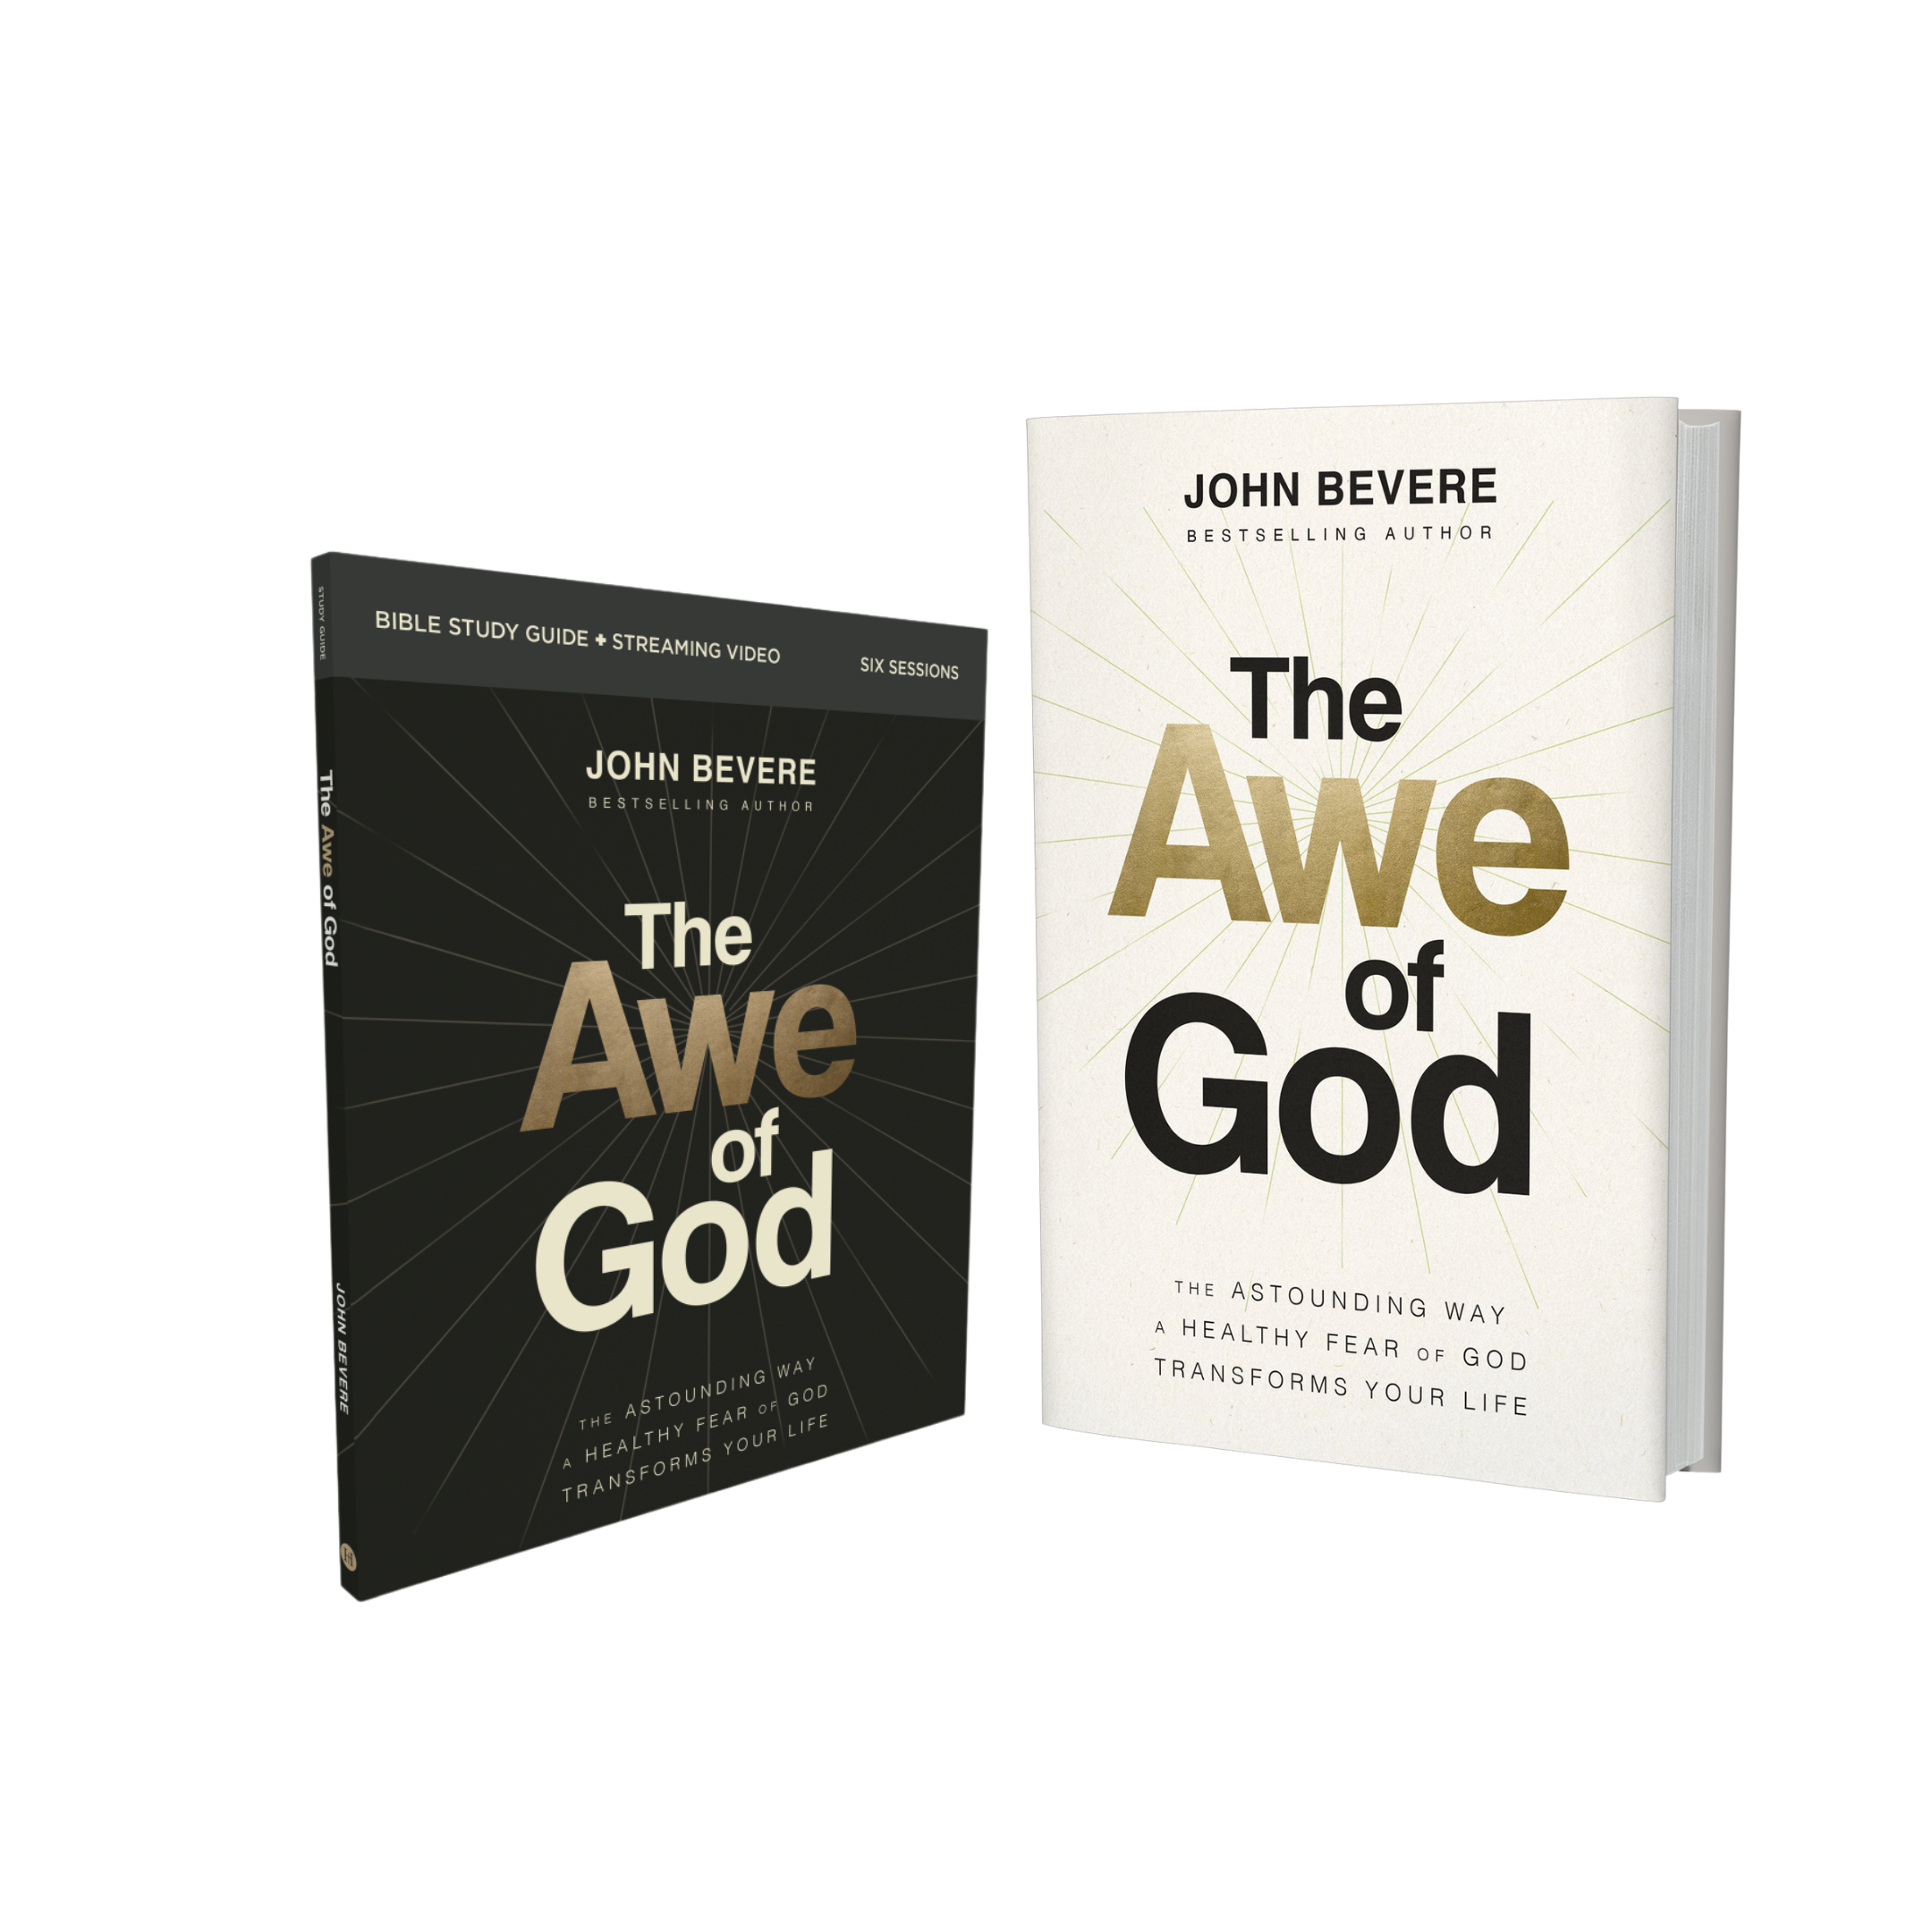 Awe　FaithGateway　Book　Bundle　Study　God　of　Guide　and　Bible　–　Store